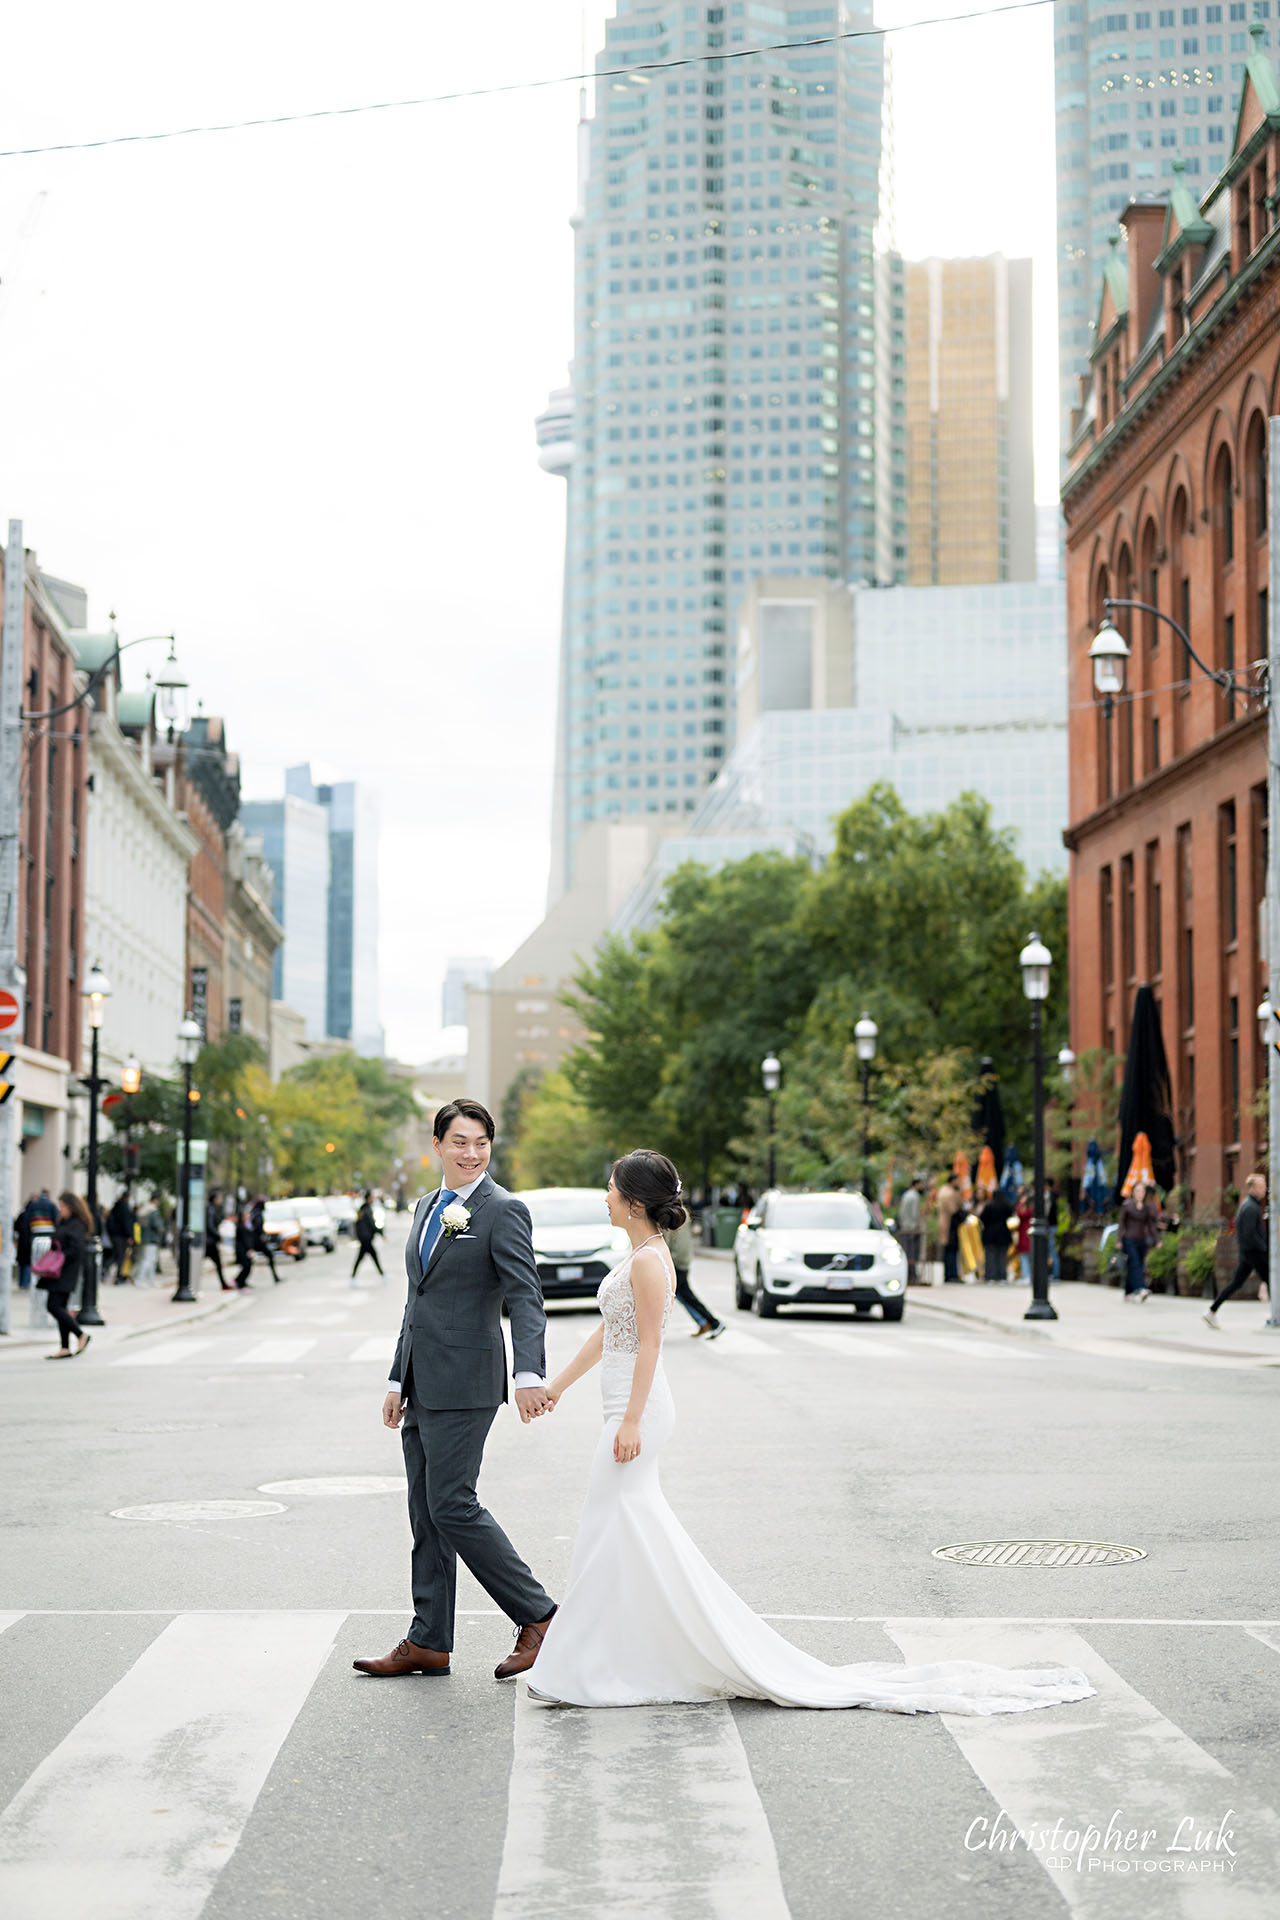 Bride Groom Wedding Holding Hands Walking Together Candid Natural Organic Photojournalistic Streetscape Downtown Toronto Front Street St Lawrence Market Architecture Street Road Crosswalk Portrait